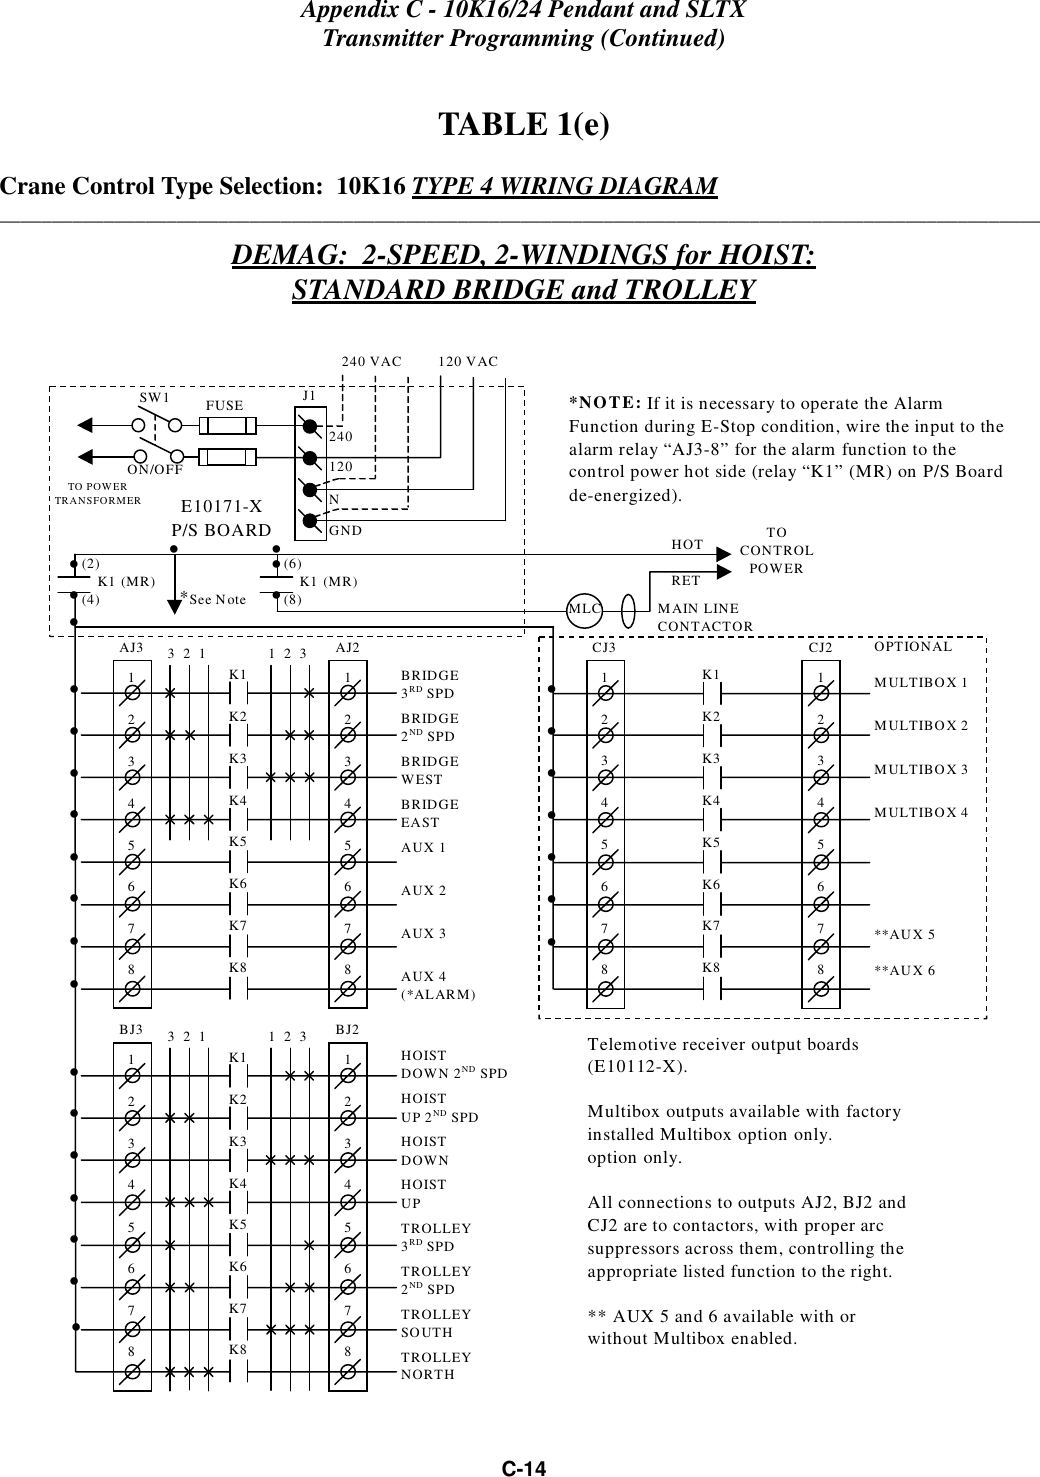 Appendix C - 10K16/24 Pendant and SLTXTransmitter Programming (Continued)C-14TABLE 1(e)Crane Control Type Selection:  10K16 TYPE 4 WIRING DIAGRAM____________________________________________________________________________________________________DEMAG:  2-SPEED, 2-WINDINGS for HOIST:STANDARD BRIDGE and TROLLEY CJ312345678CJ212345678K1K2K3K4K5K6K7K8OPTIONALMULTIBOX 1MULTIBOX 2MULTIBOX 3MULTIBOX 4**AUX 5**AUX 6• • • • • • • BJ312345678BJ212345678K1K2K3K4K5K6K7K83  2  1 1  2  3HOISTDOWN 2ND SPDHOISTUP 2ND SPDHOISTDOWNHOISTUPTROLLEY3RD SPDTROLLEY2ND SPDTROLLEYSOUTHTROLLEYNORTH• • • • • • AJ312345678AJ212345678K1K2K3K4K5K6K7K83  2  1 1  2  3BRIDGE3RD SPDBRIDGE2ND SPDBRIDGEWESTBRIDGEEASTAUX 1AUX 2AUX 3AUX 4(*ALARM)• • • • • • • • *NOTE: If it is necessary to operate the AlarmFunction during E-Stop condition, wire the input to thealarm relay “AJ3-8” for the alarm function to thecontrol power hot side (relay “K1” (MR) on P/S Boardde-energized).Telemotive receiver output boards(E10112-X).Multibox outputs available with factoryinstalled Multibox option only.option only.All connections to outputs AJ2, BJ2 andCJ2 are to contactors, with proper arcsuppressors across them, controlling theappropriate listed function to the right.** AUX 5 and 6 available with orwithout Multibox enabled.240 VAC         120 VACSW1ON/OFFTO POWERTRANSFORMER E10171-XP/S BOARDMAIN LINECONTACTORTOCONTROLPOWERMLCHOTRET(2)    K1   (MR)(4)• • • *See Note• 240120FUSE J1NGND(6)    K1   (MR)(8)• • • • 